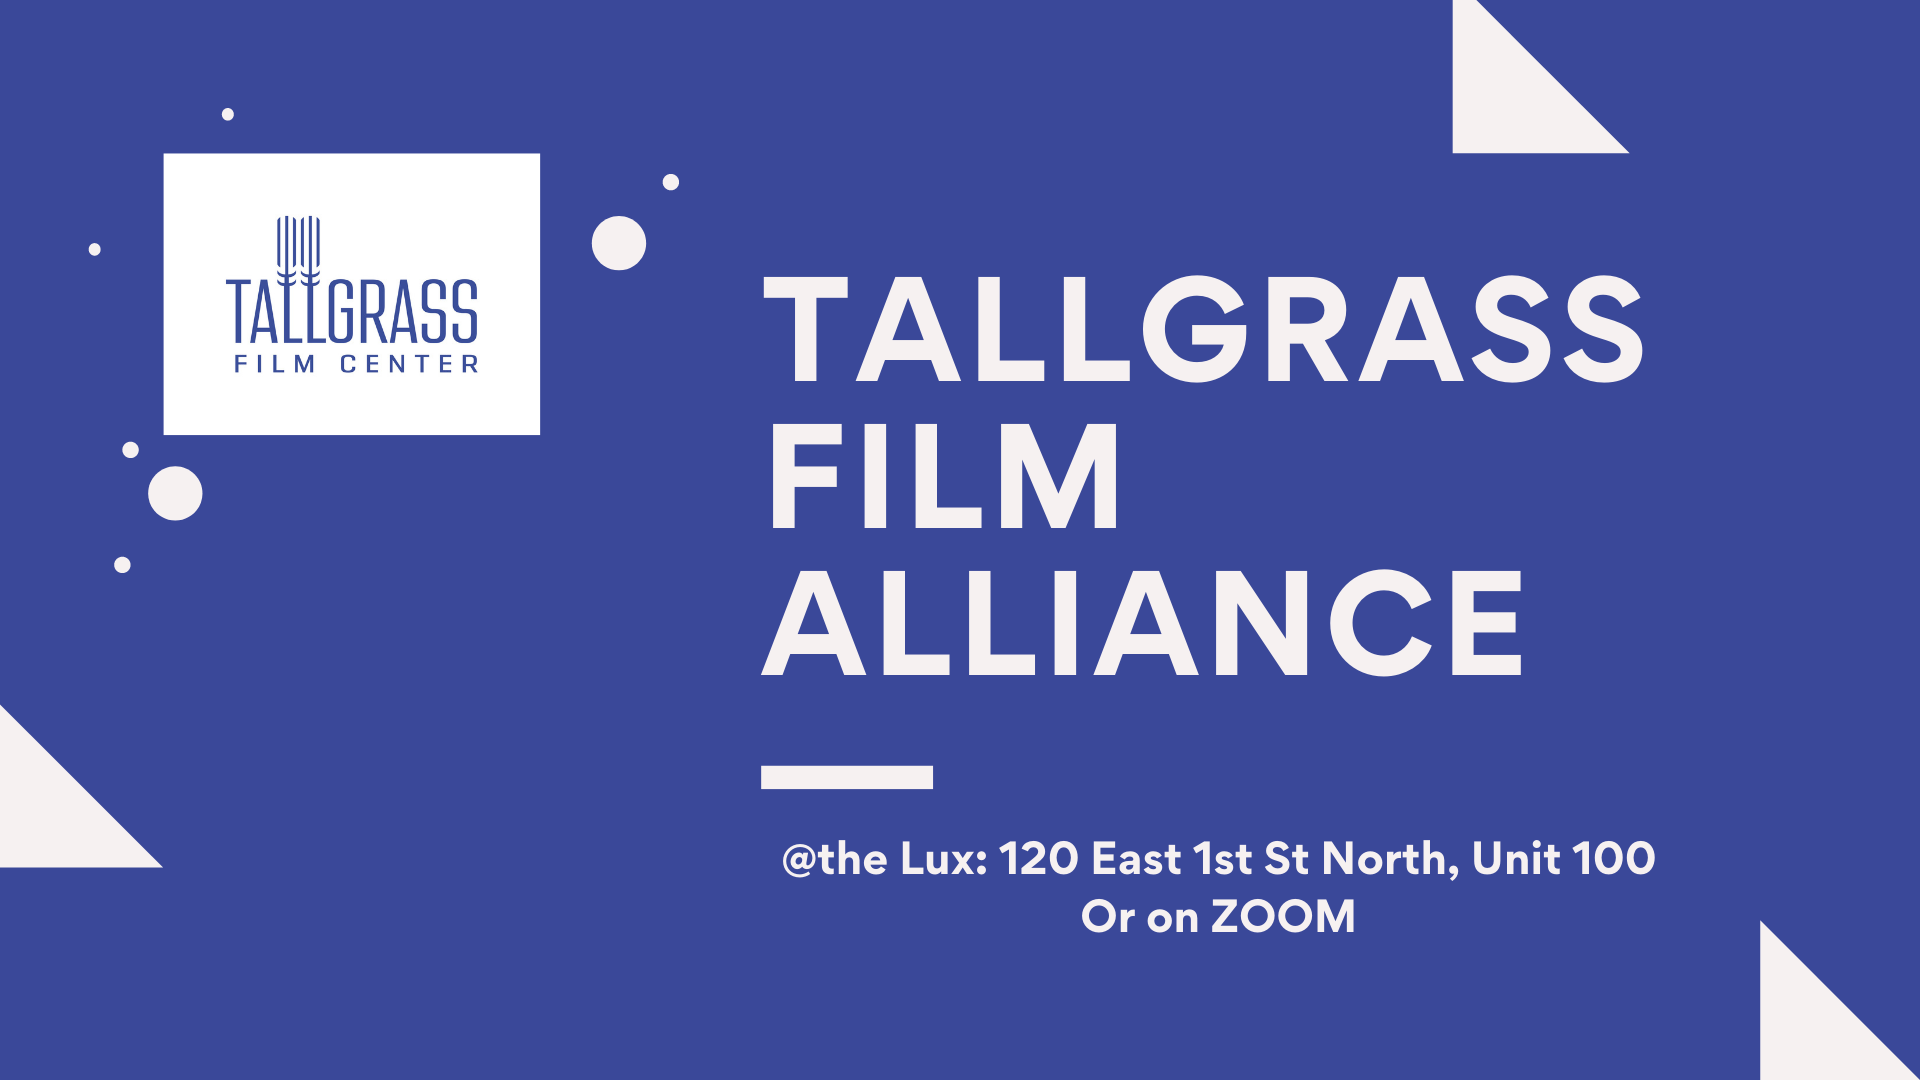 Text says Tallgrass Film Alliance with blue background image